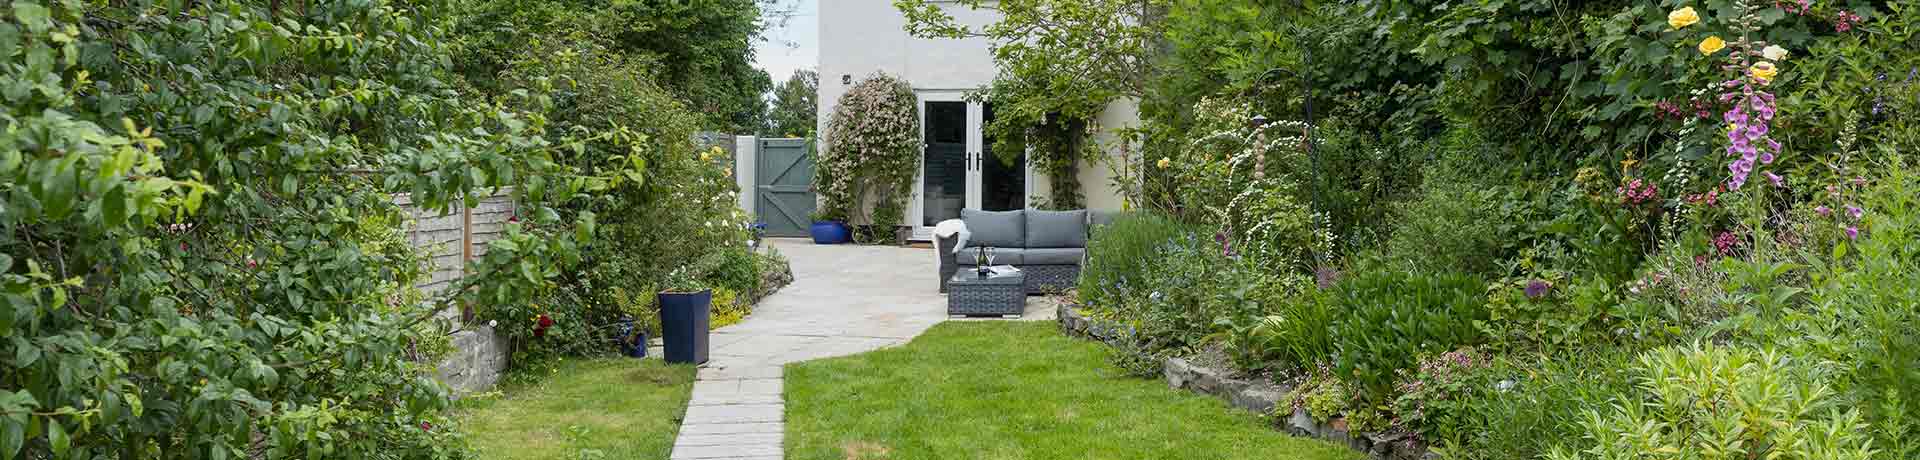 Dog friendly cottages on the Isle of Wight with an enclosed garden.